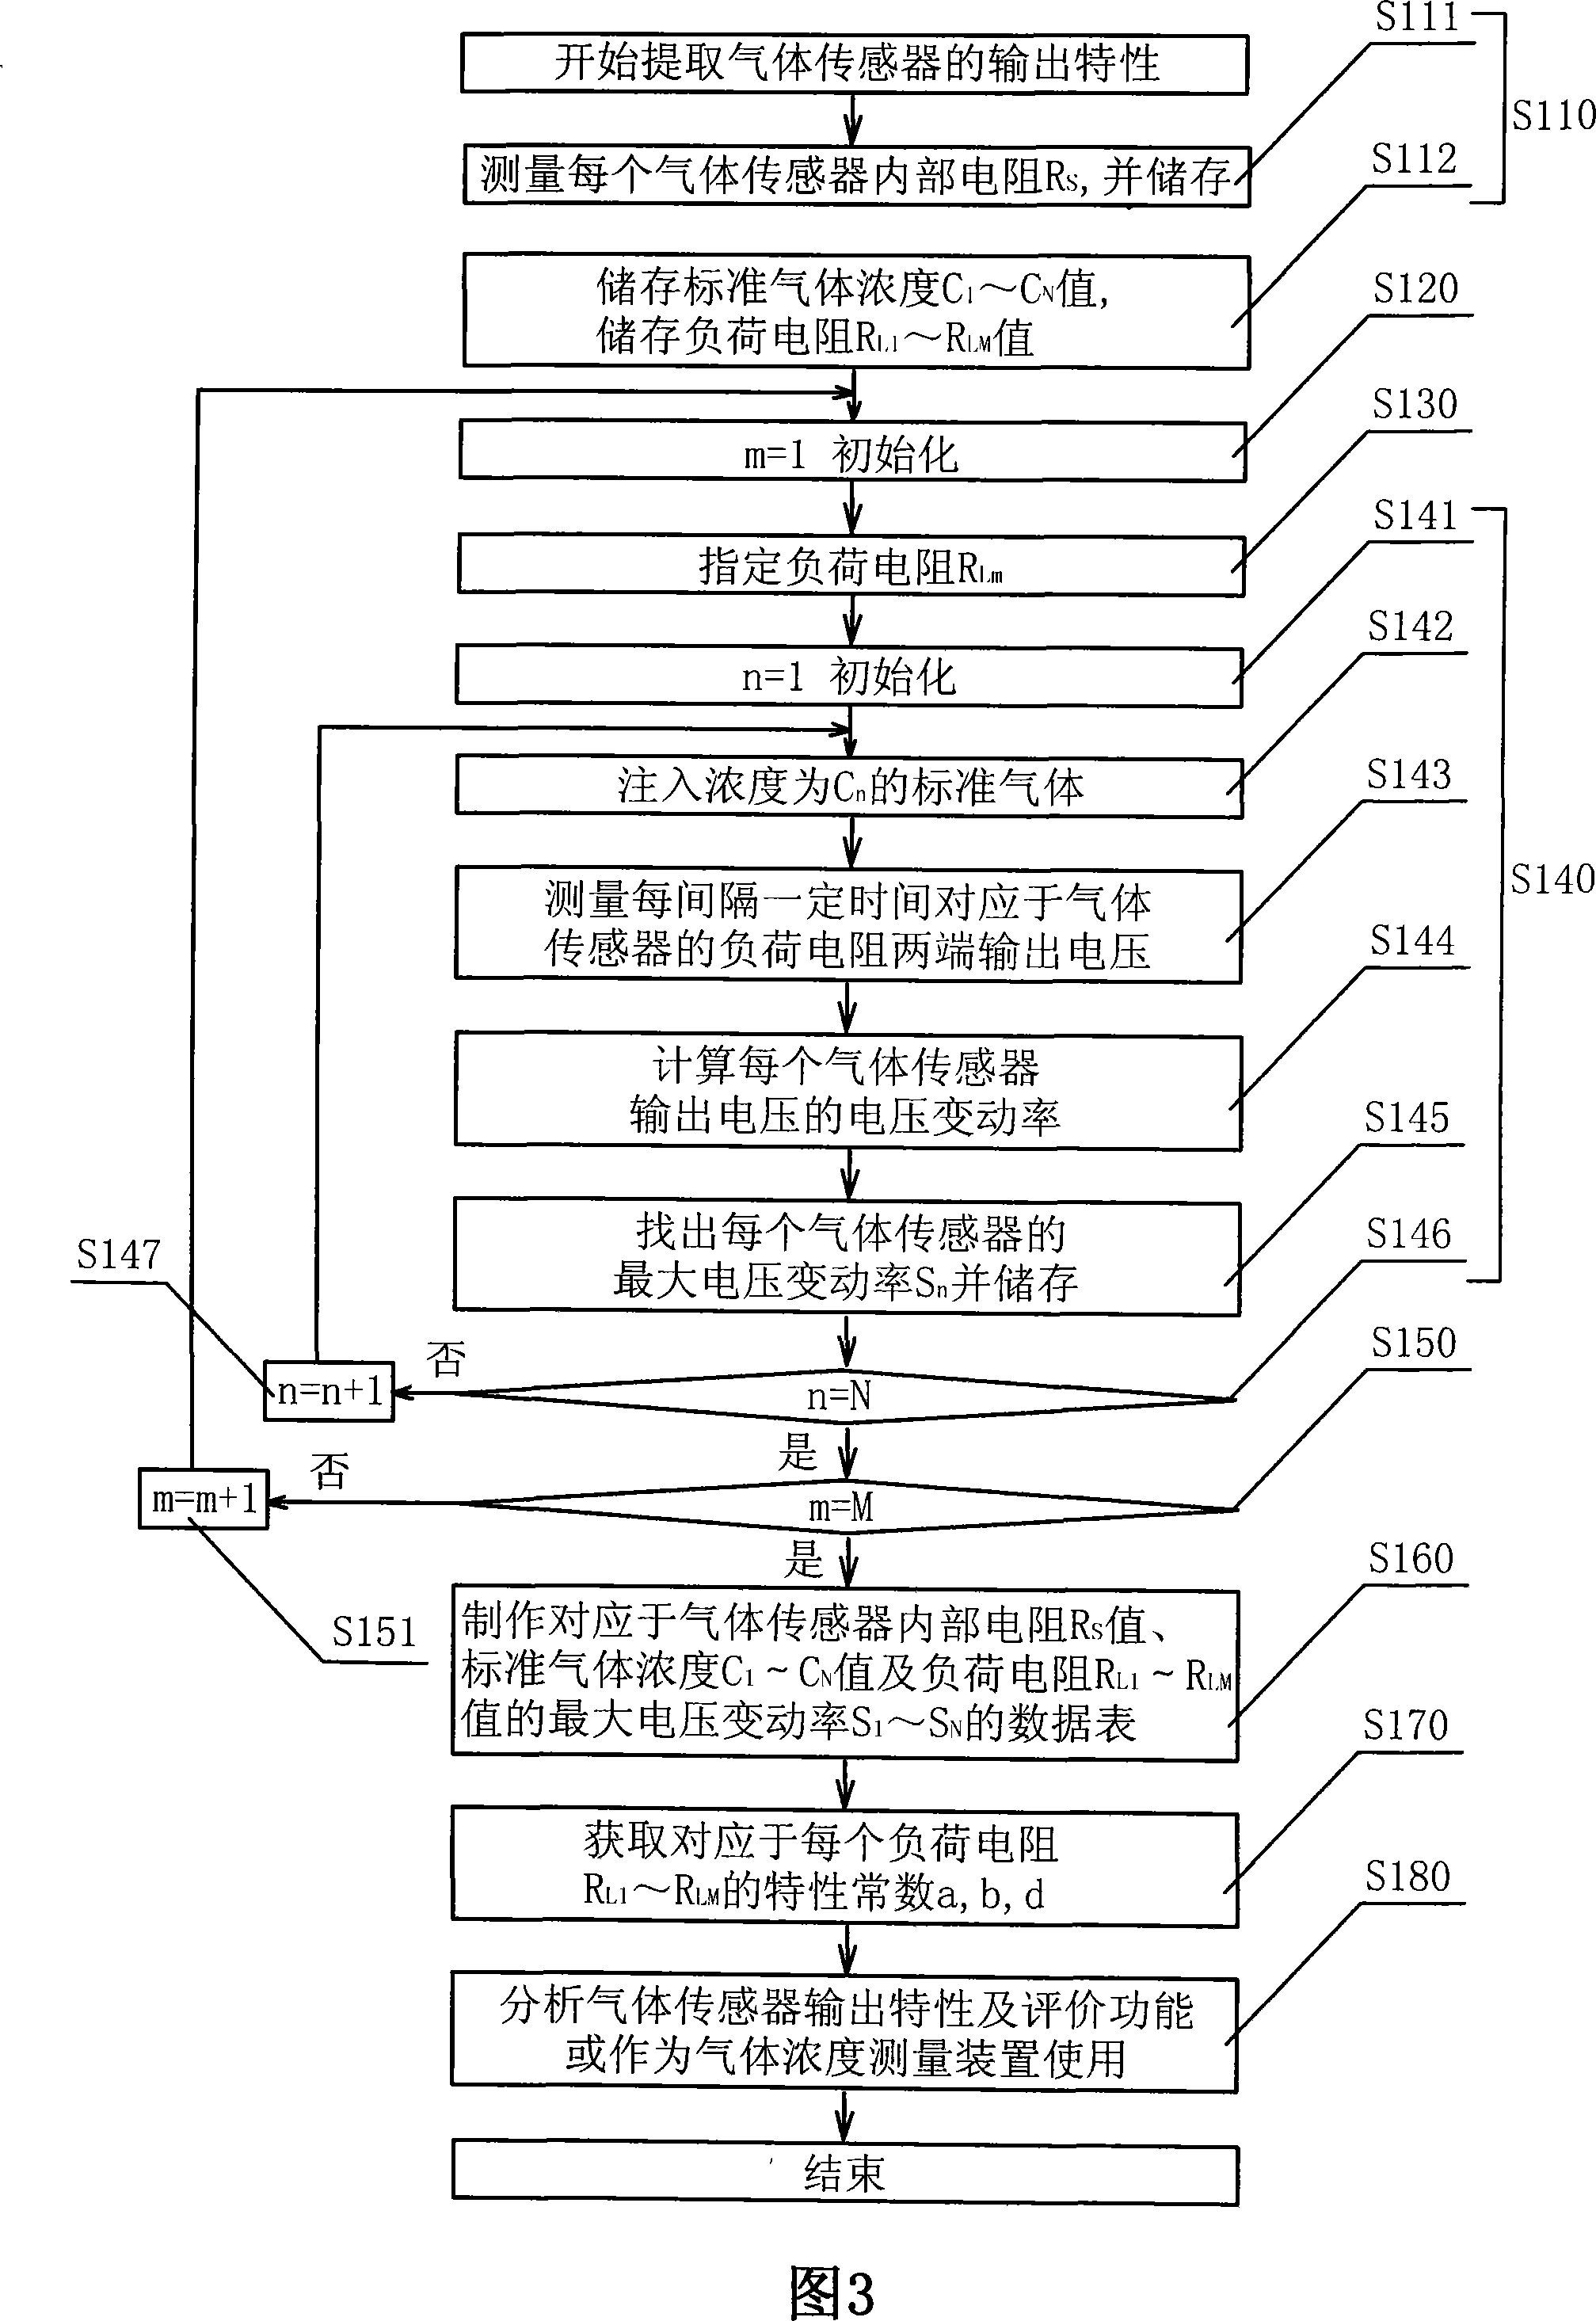 Method for extracting property of gas sensor output, and device and method for measuring gas density using it